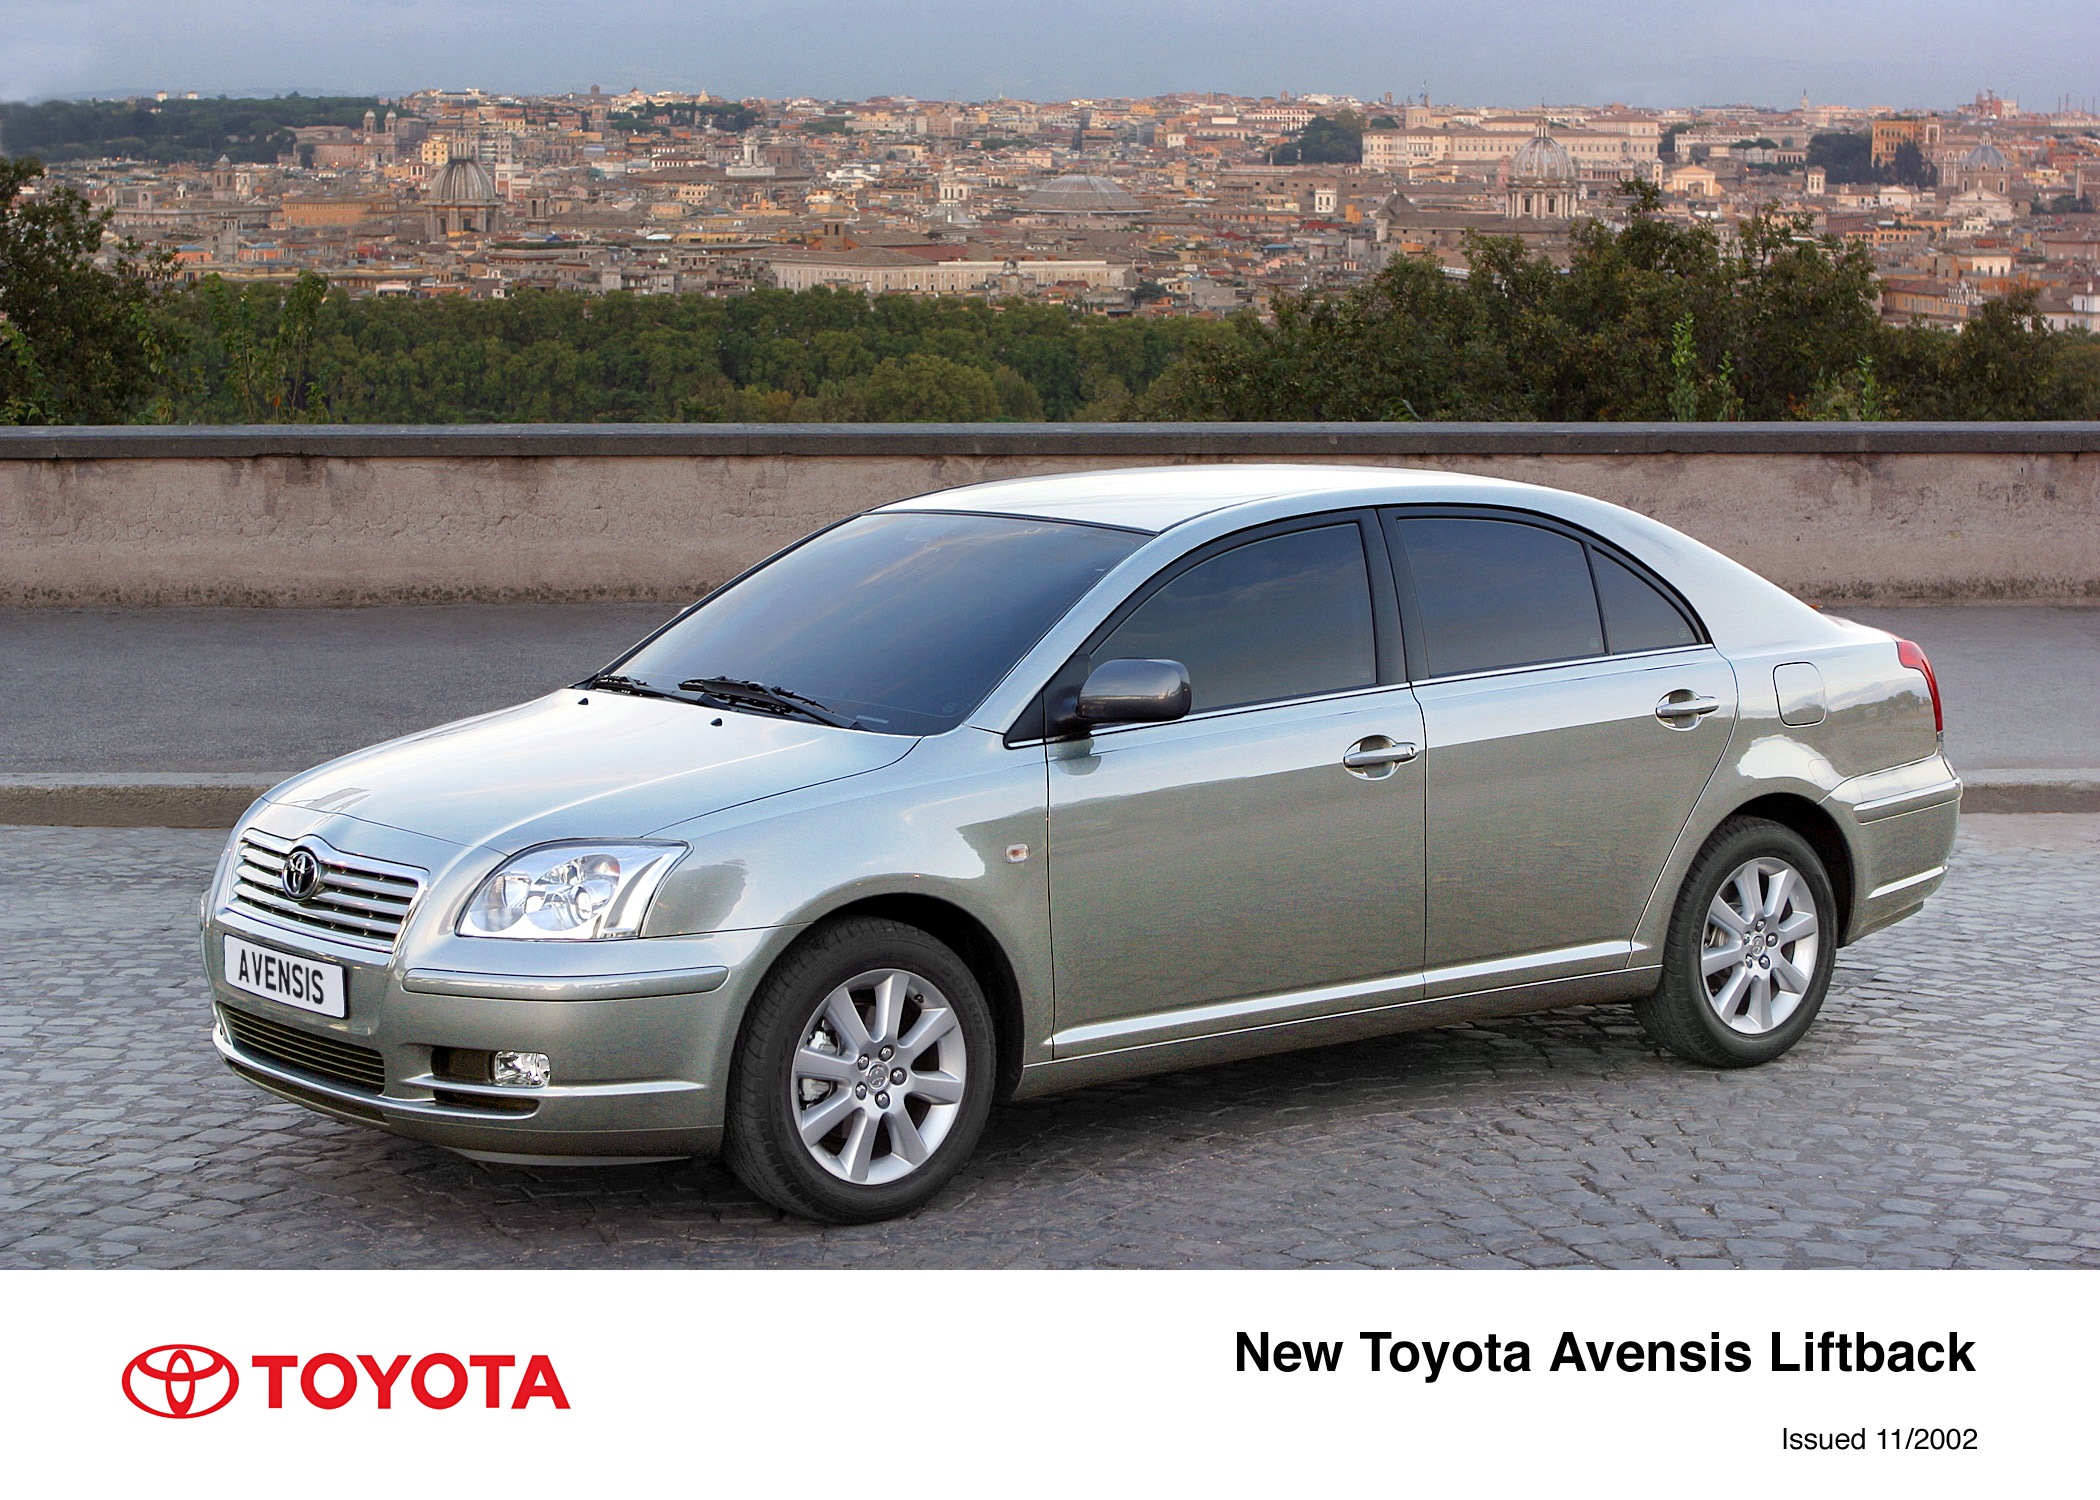 Avensis: Quality And Innovation - Toyota Media Site